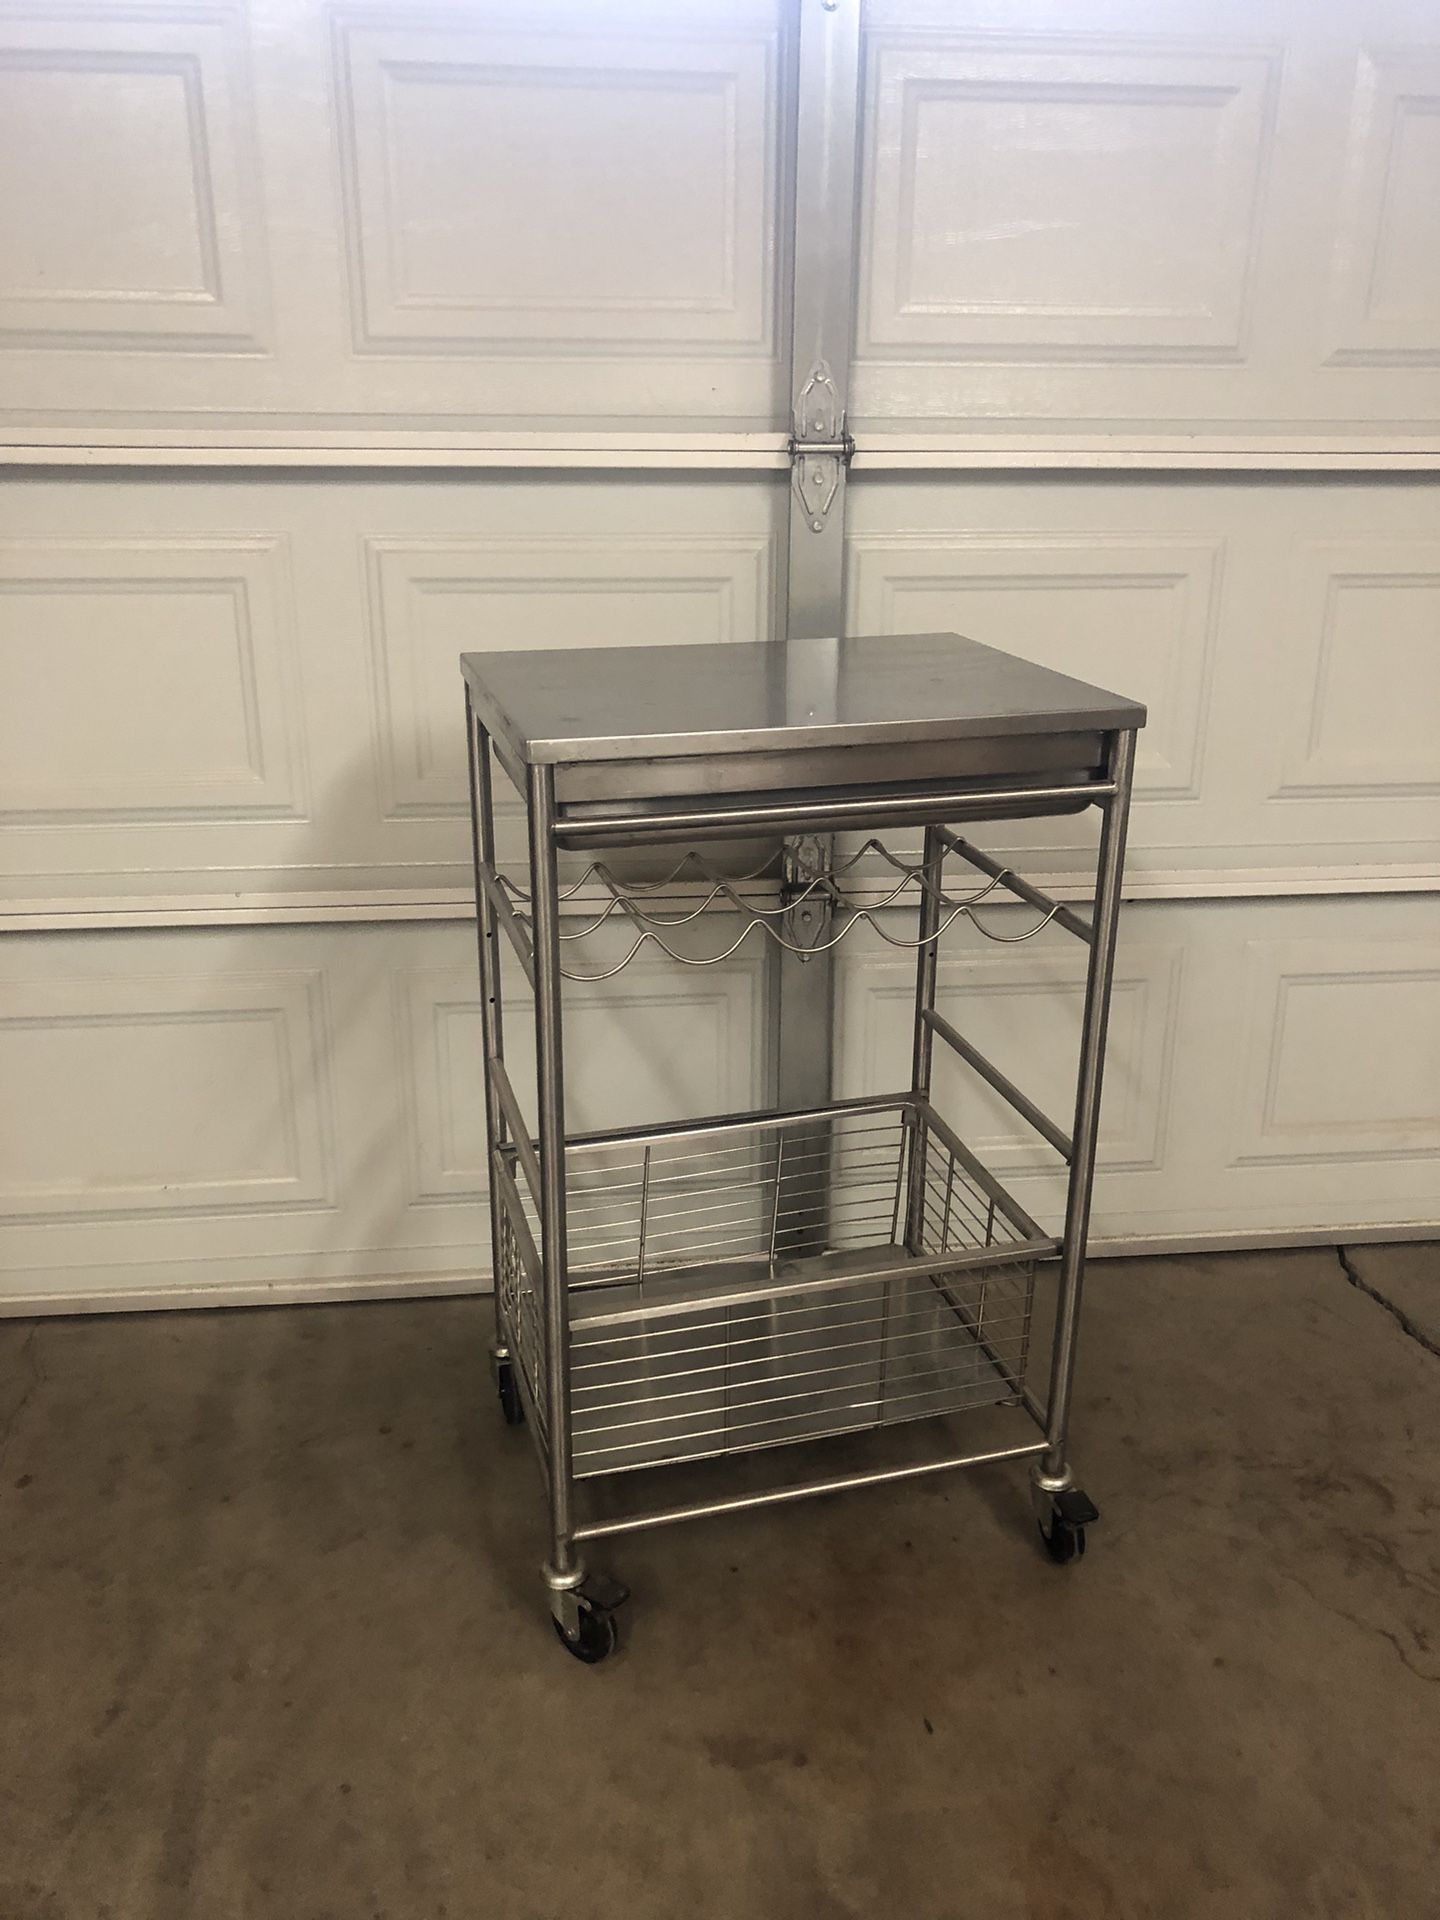 Stainless Steel Cart. $75